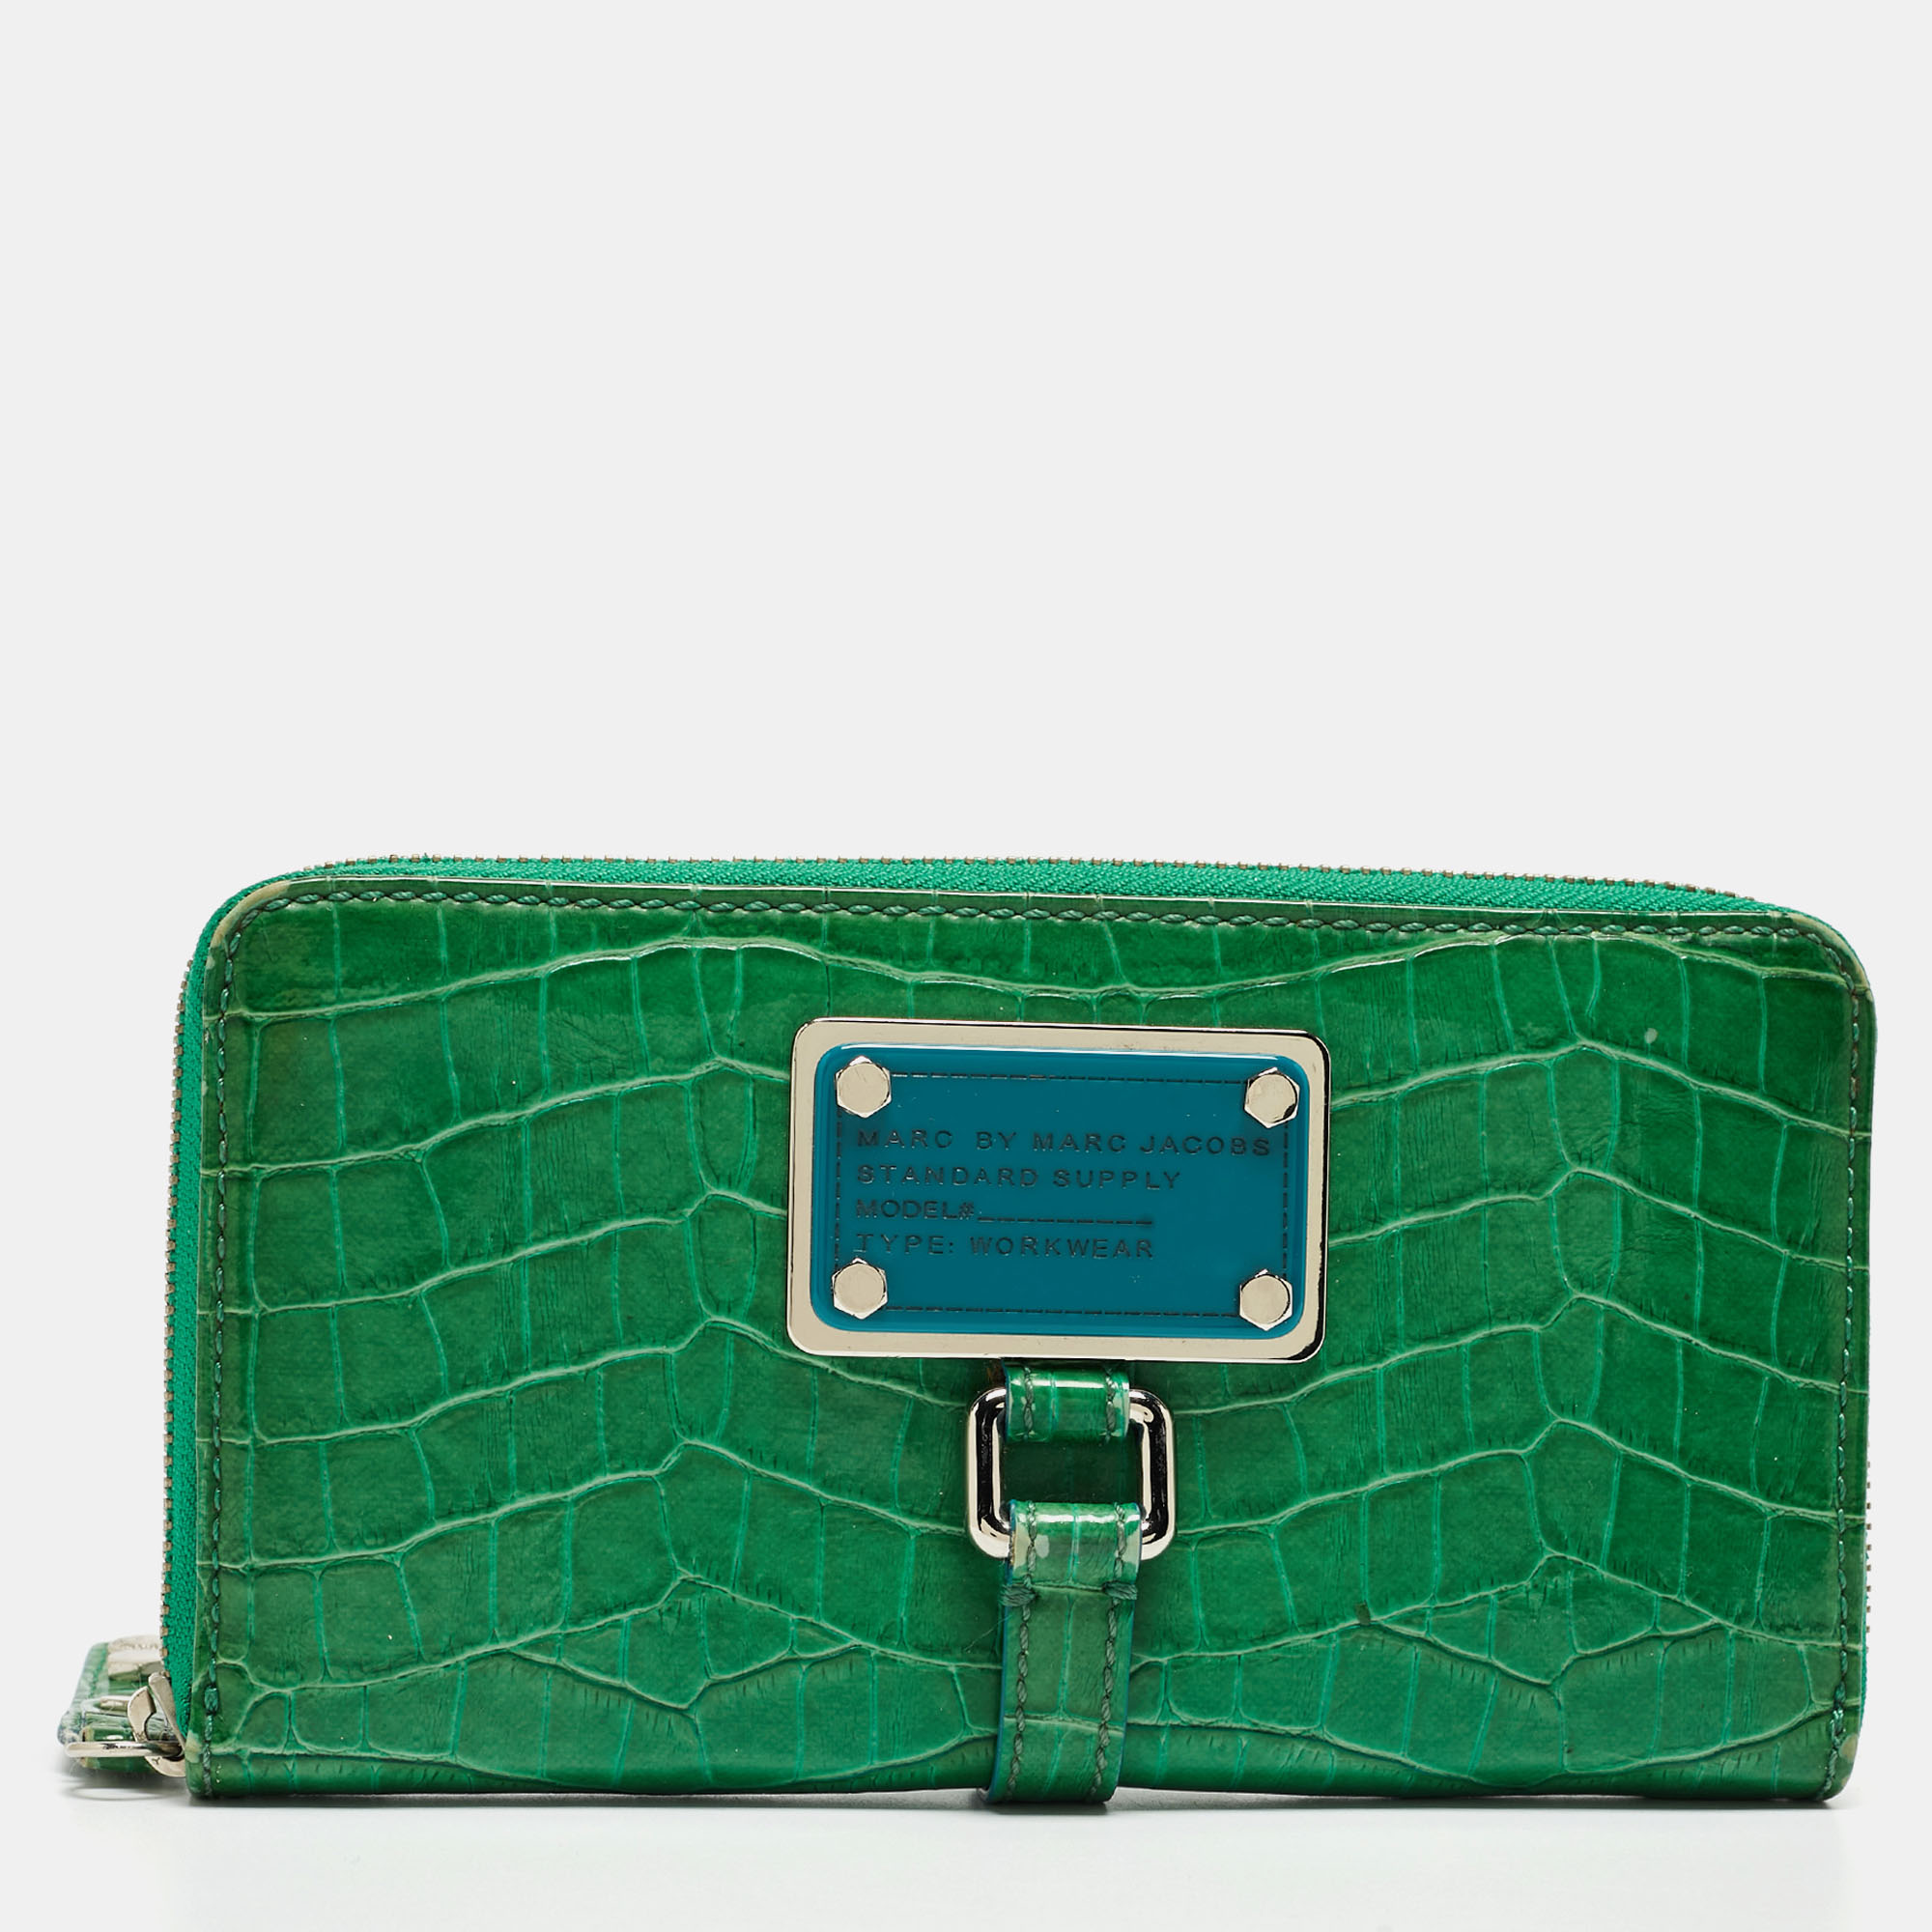 Pre-owned Marc By Marc Jacobs Green Croc Embossed Patent Leather Zip Around Wallet